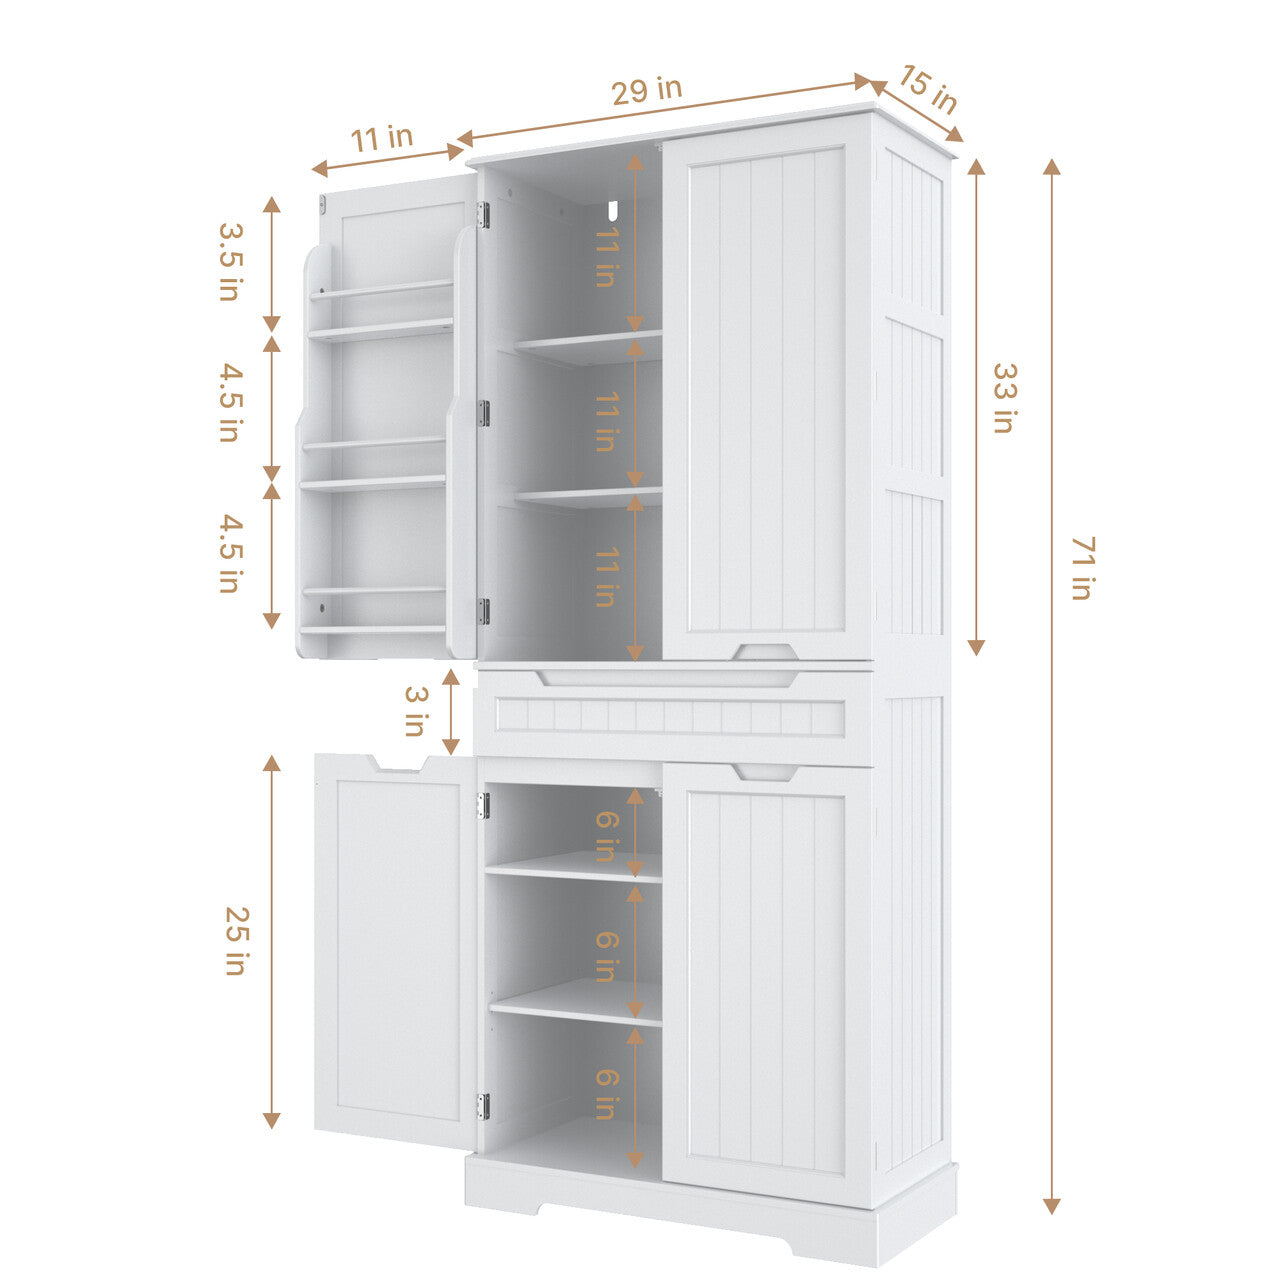 Gizoon AP15 71" Kitchen Pantry Storage Cabinet with Doors and Shelves